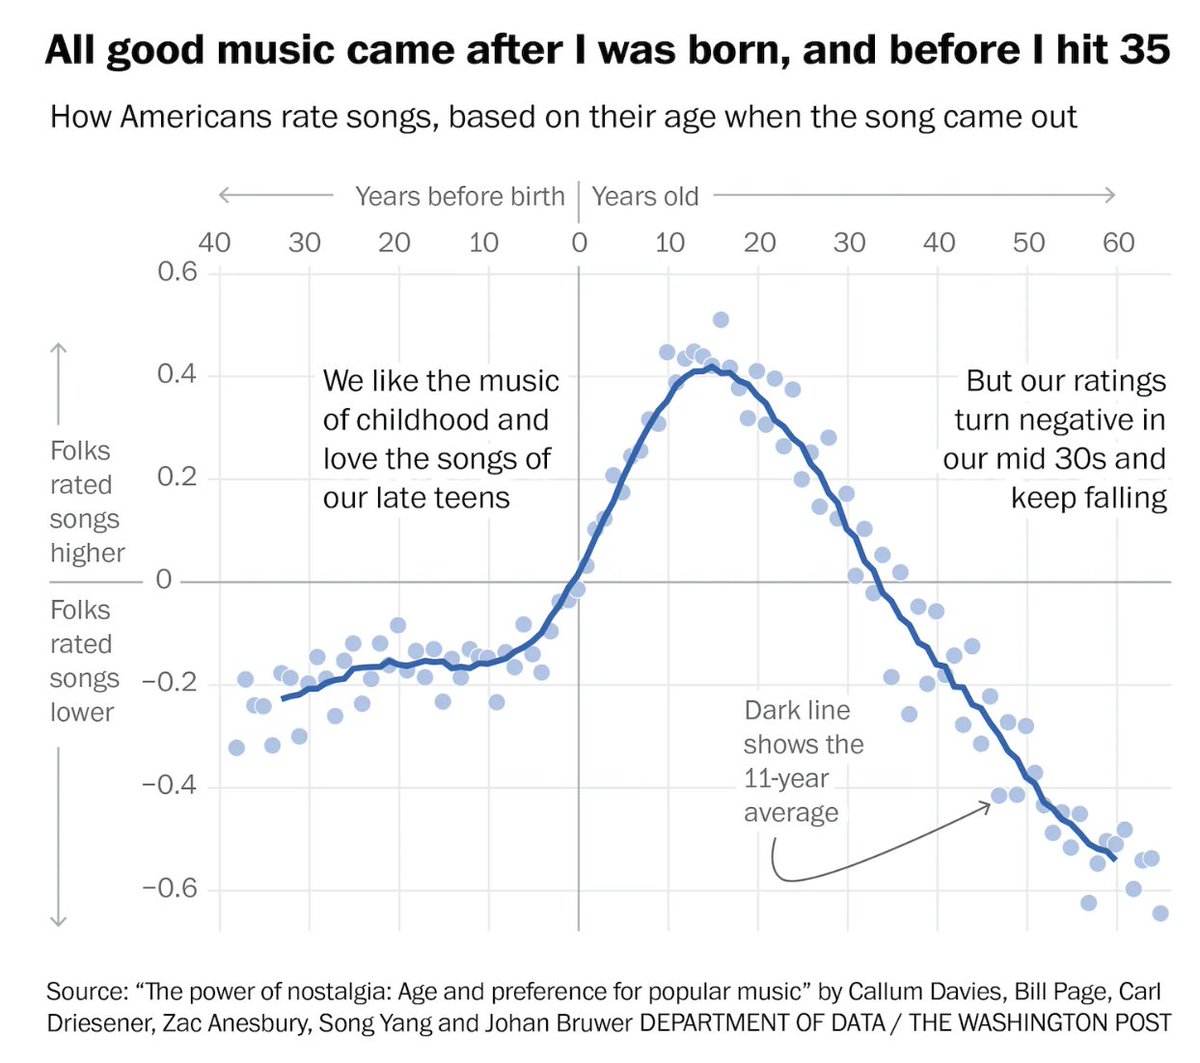 'Music when we were growing up was the best. Everything these days is so terrible.' Turns out across every single generation, quality of music peaks at age 17 and you begin to start hating any music made after you're 35. The Nostalgia Effect is powerful!